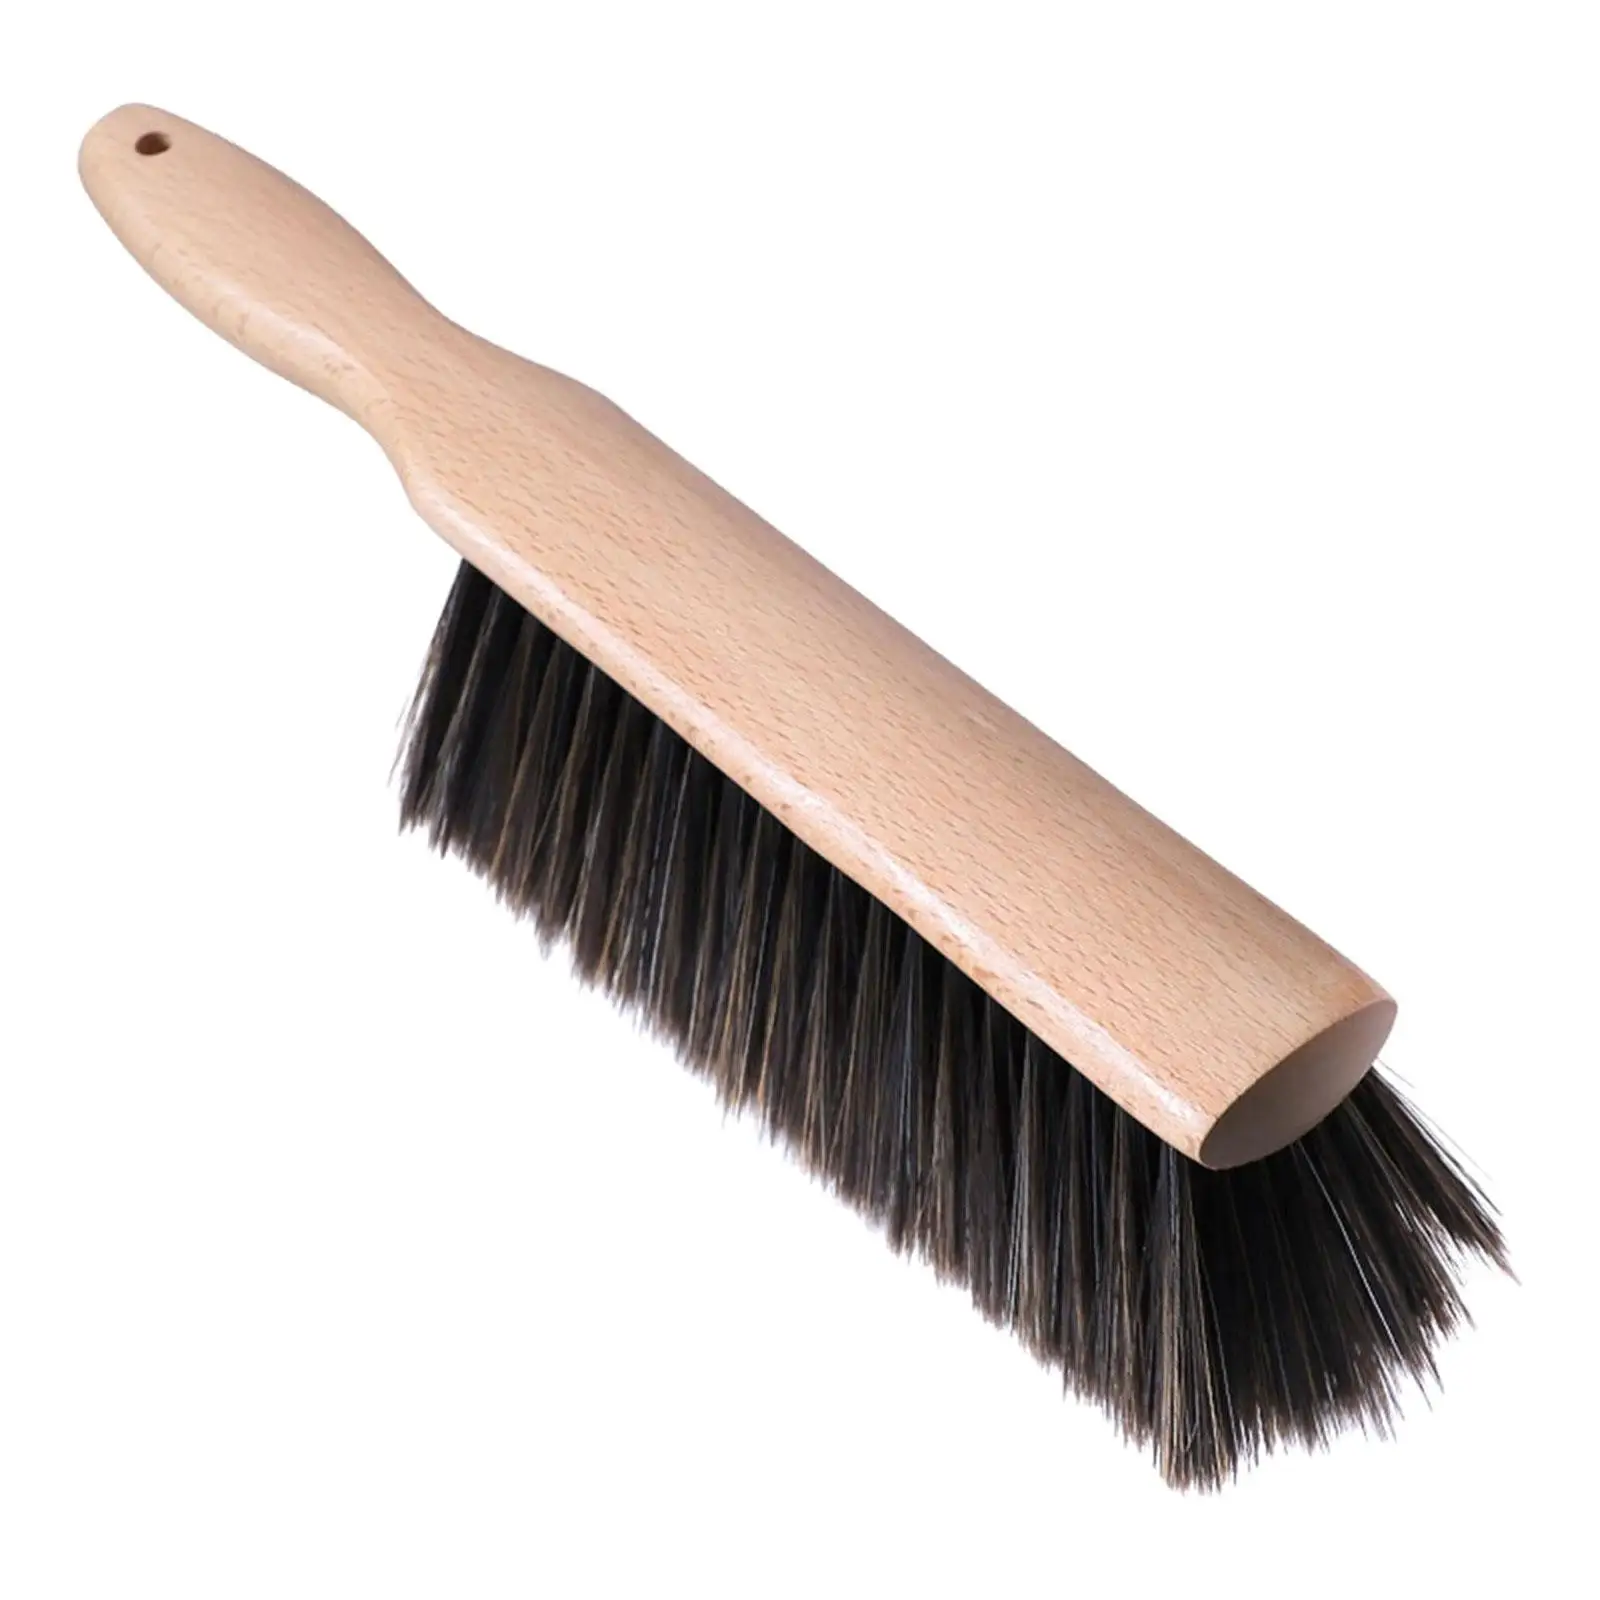 https://ae01.alicdn.com/kf/S78eac43d15df4b79b2c77bc29ca500d9Q/Dustproof-Brush-Clothes-Brush-Whisk-Broom-Long-Handle-Cleaning-Brushes-for-Cleaning-Supplies-Furniture-Draft-Fireplace.jpg